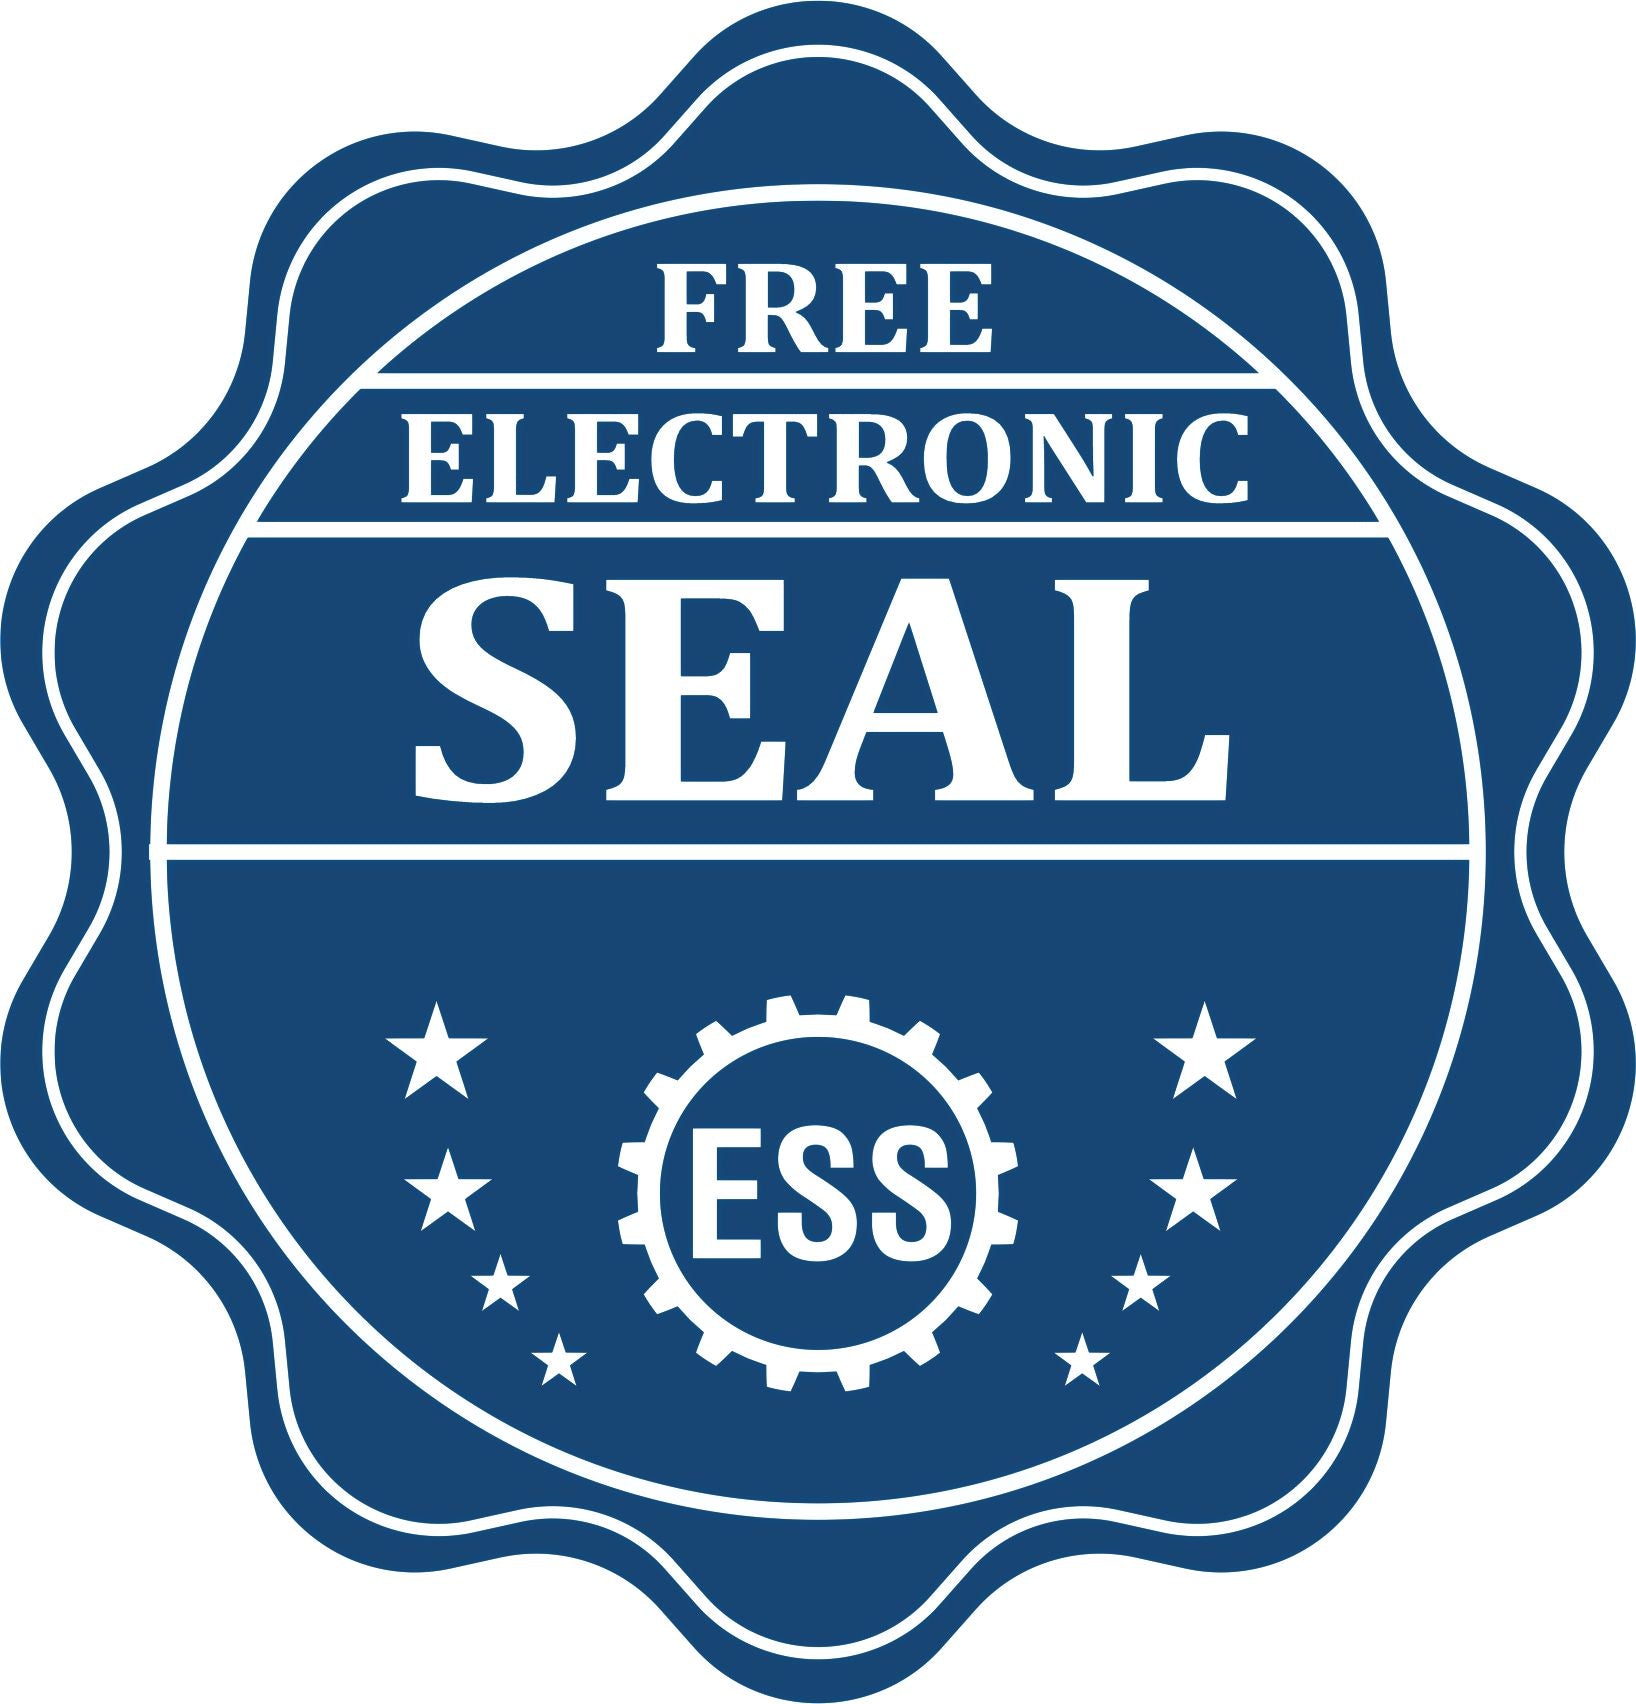 A badge showing a free electronic seal for the Heavy-Duty Missouri Rectangular Notary Stamp with stars and the ESS gear on the emblem.